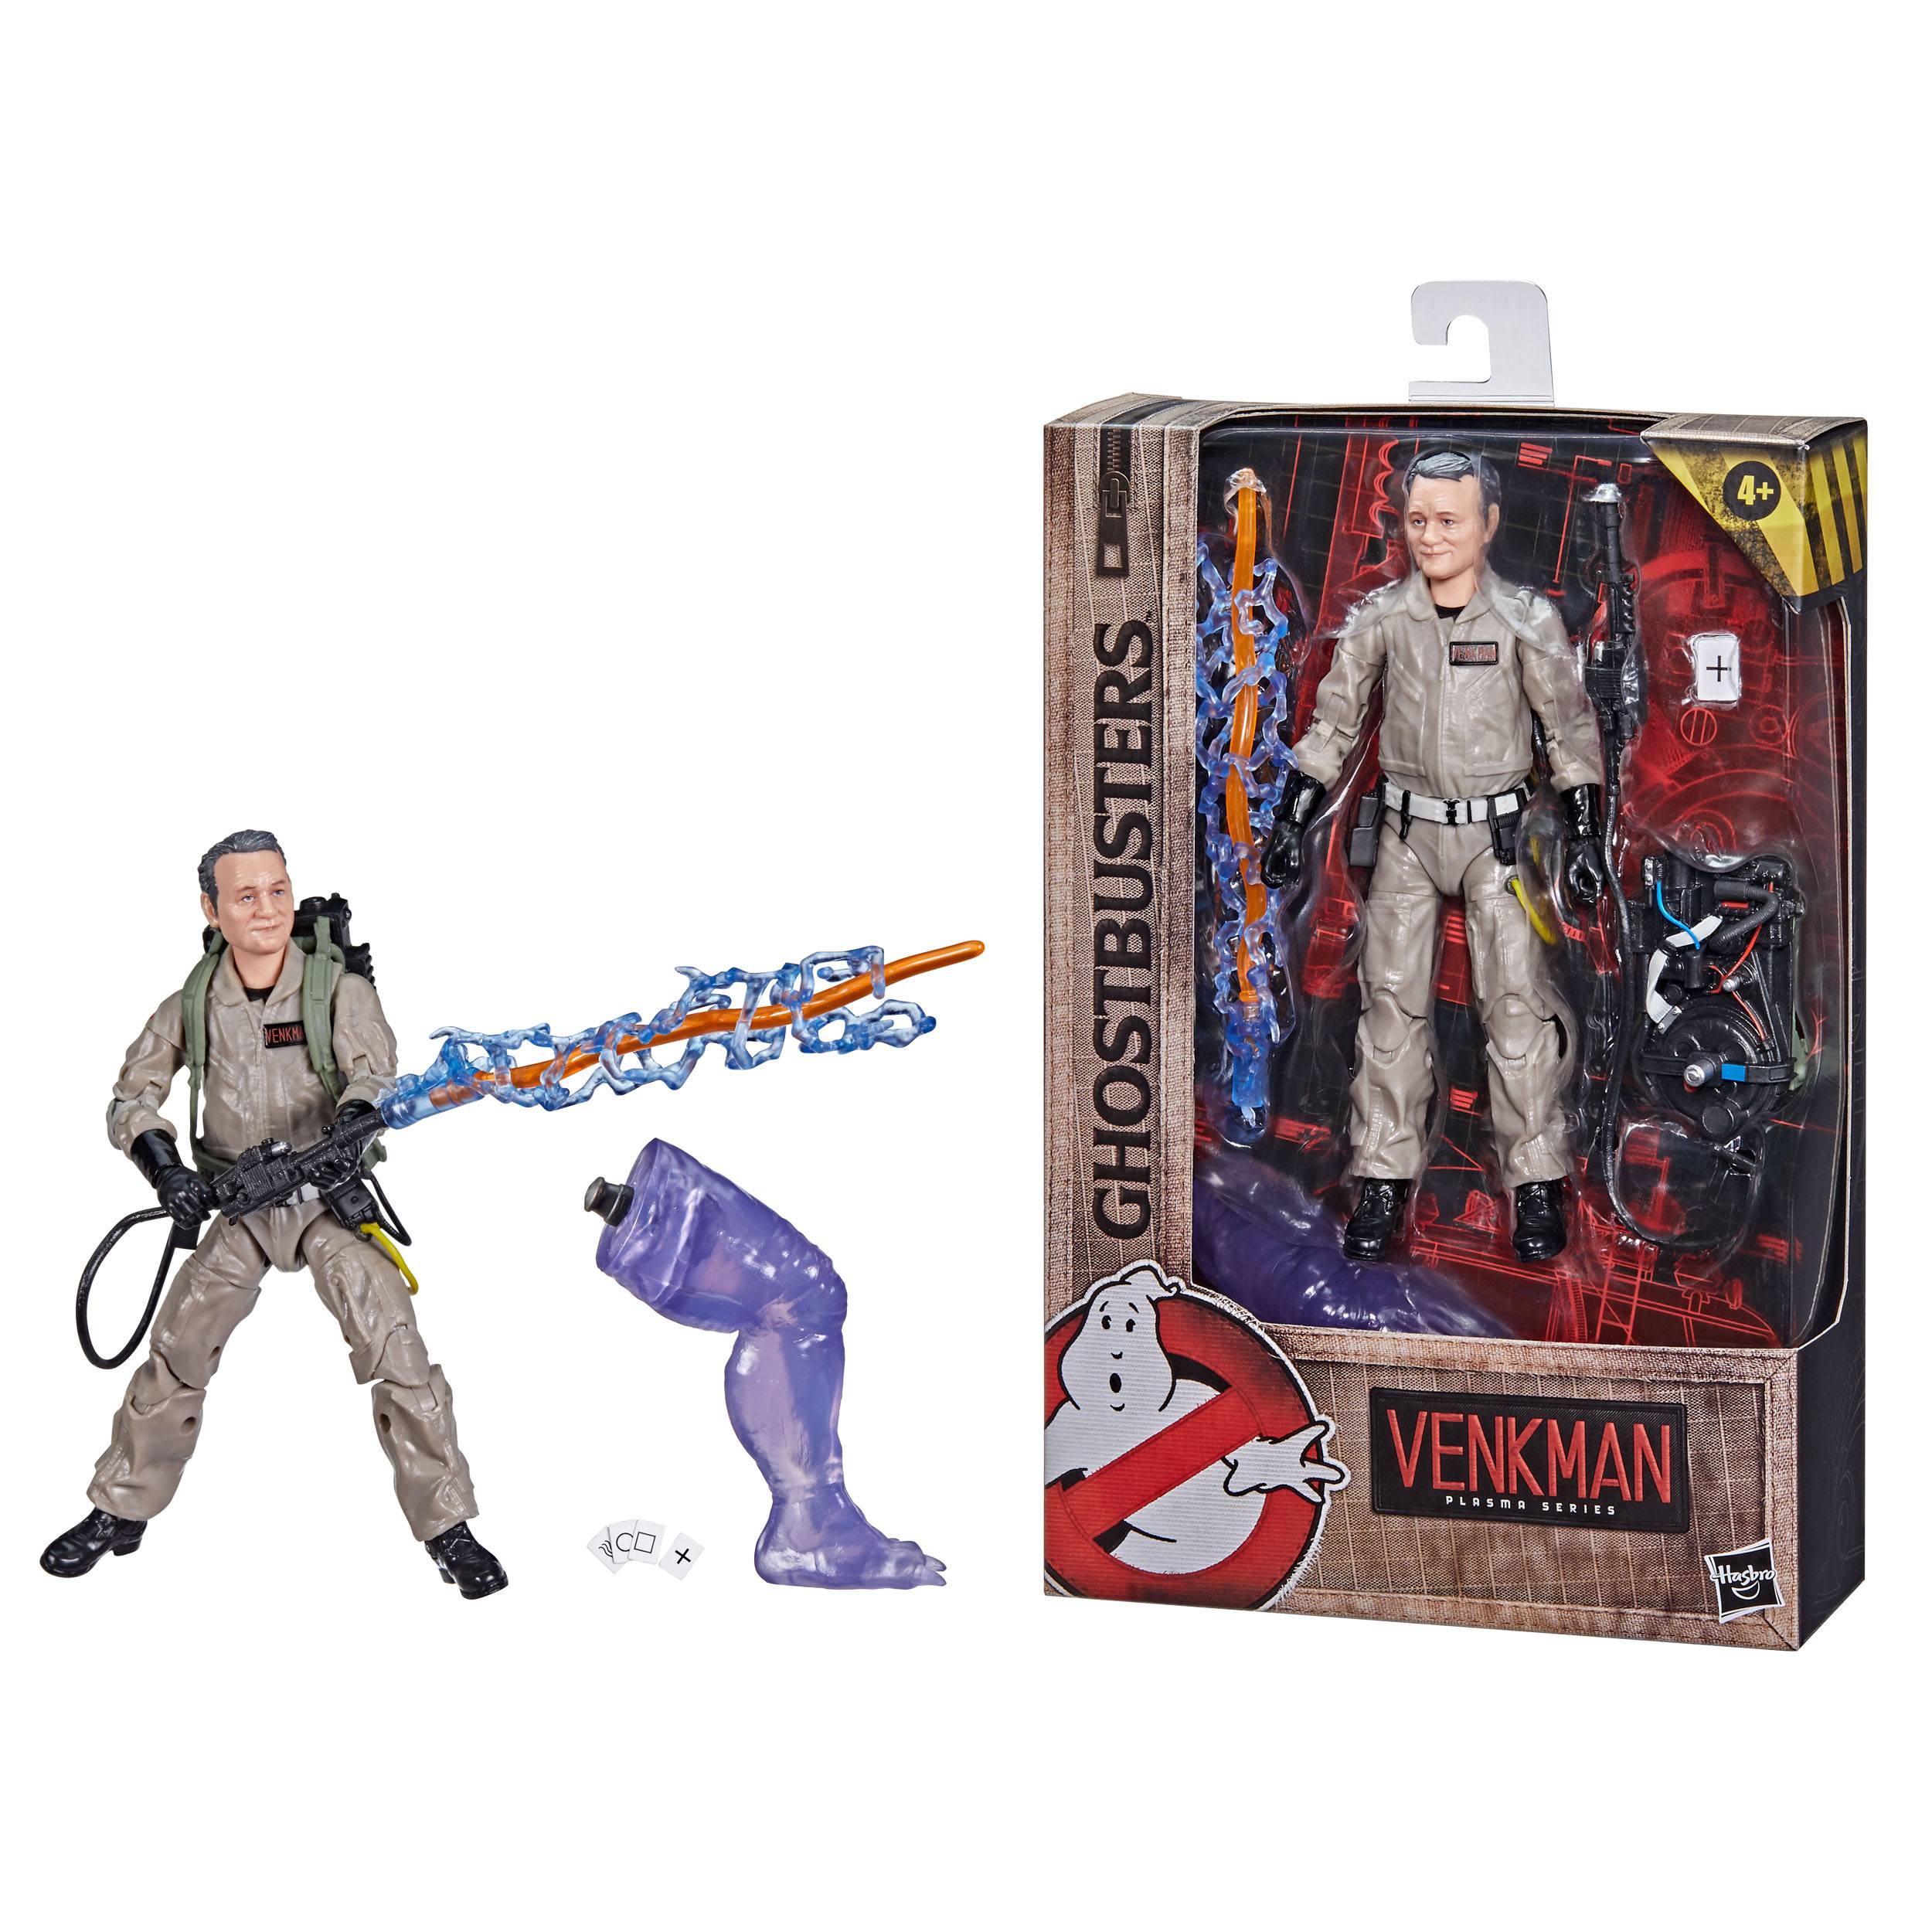 Ghostbusters Plasma Series Afterlife Figures Assortment (7) Wave F12525L00 5010993855094